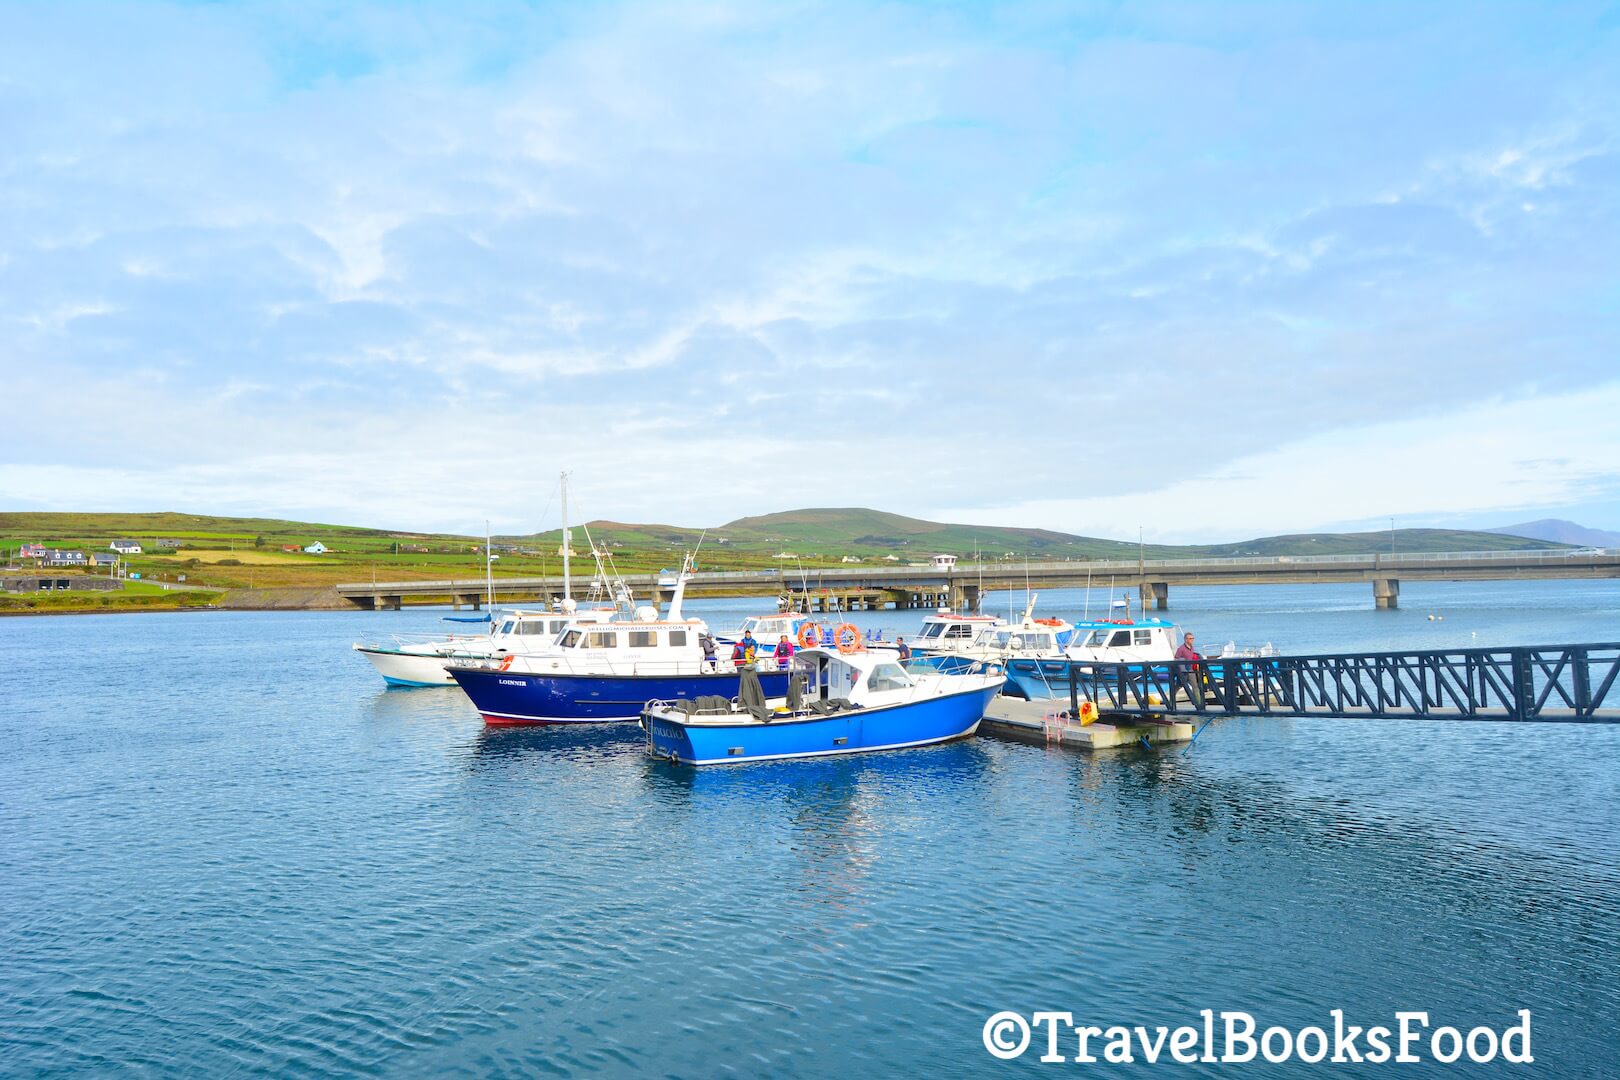 A photo of Portmagee Harbour with crystal clear blue water and few boats with a bridge and some mountains in the distance